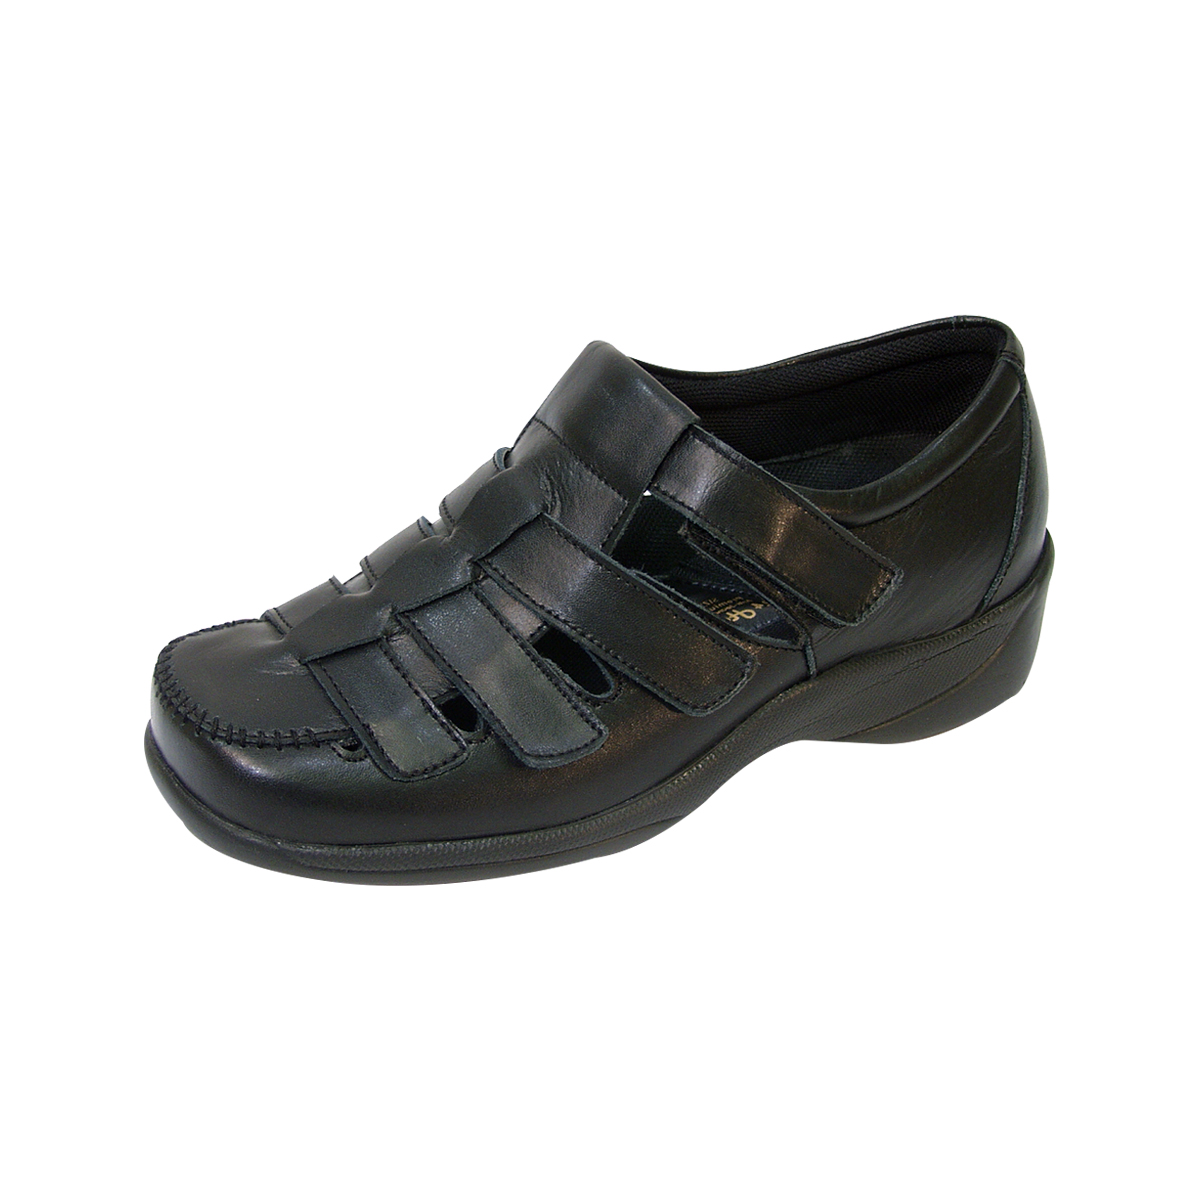 24 HOUR COMFORT Audrey Wide Width Comfort Shoes For Work and Casual Attire BLACK 6 - image 1 of 6